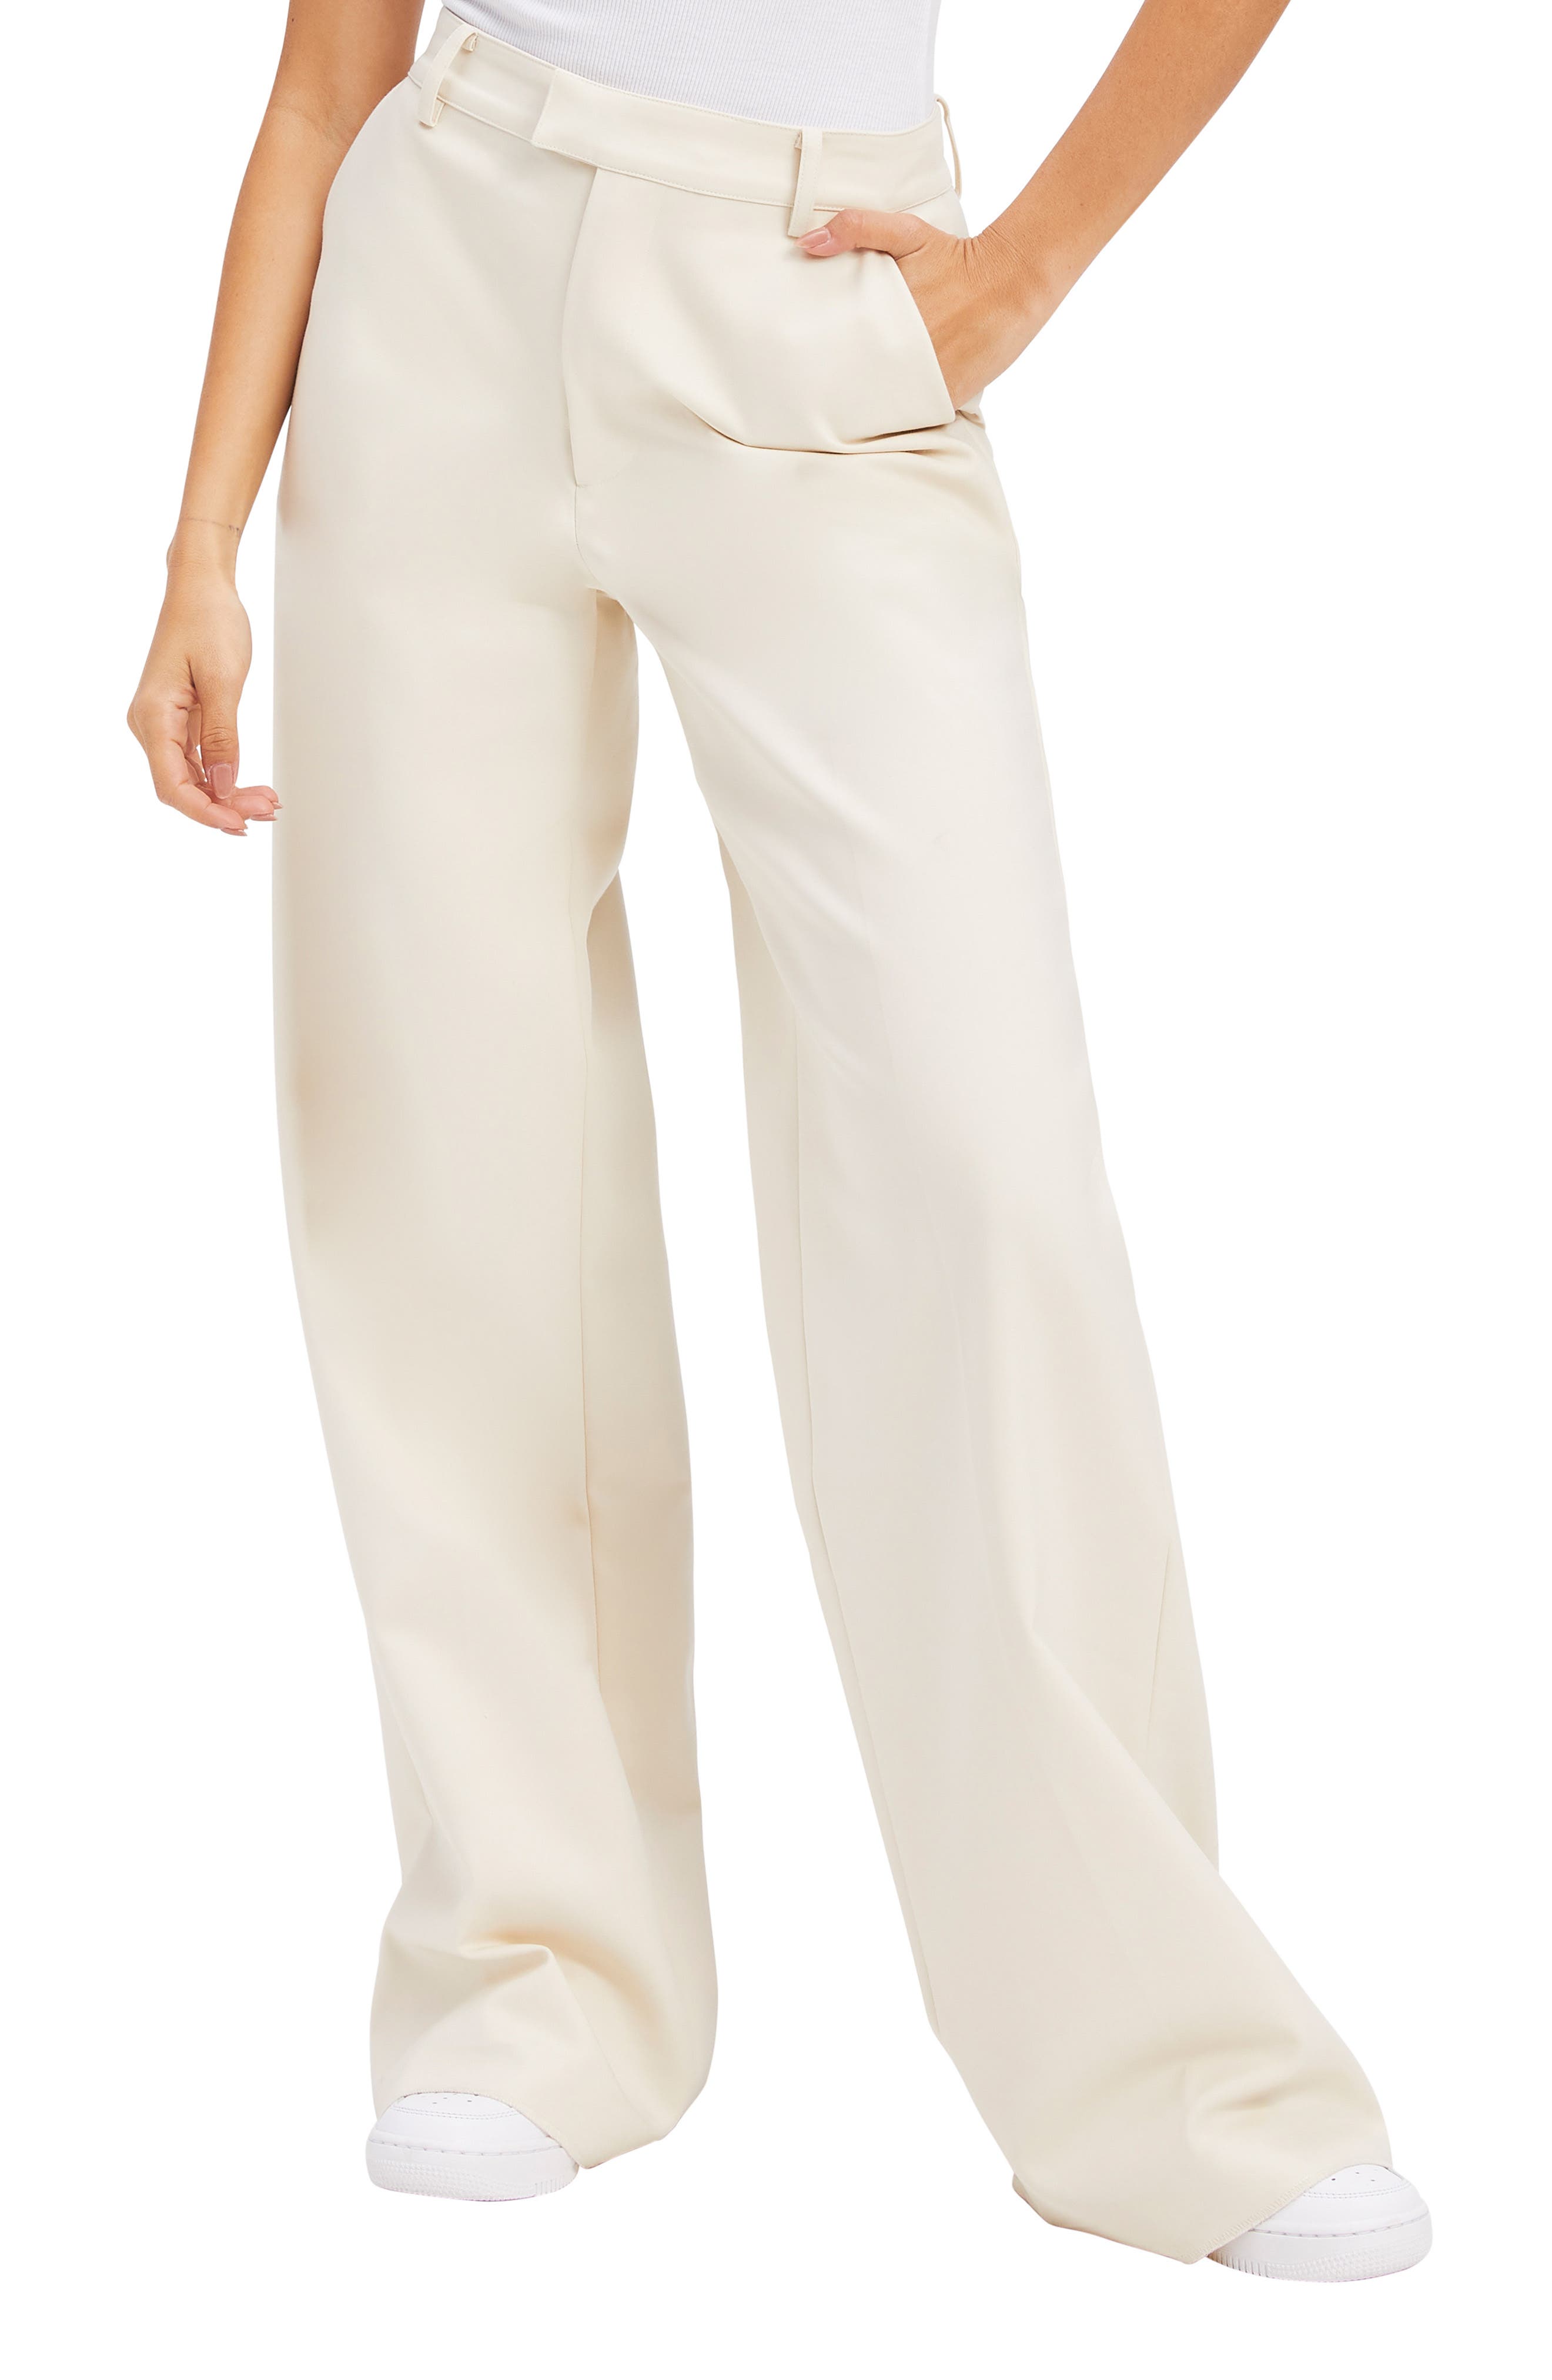 Chloé Pants in Sand Womens Clothing Trousers Natural Slacks and Chinos Wide-leg and palazzo trousers 